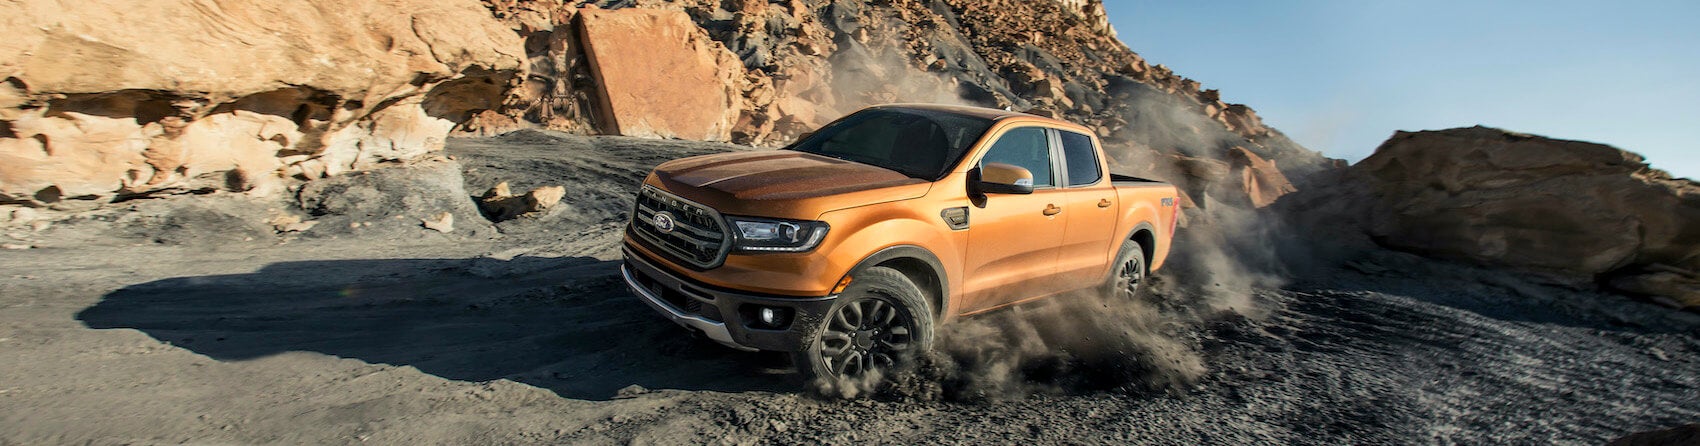 Ford Ranger - Consumer Reports